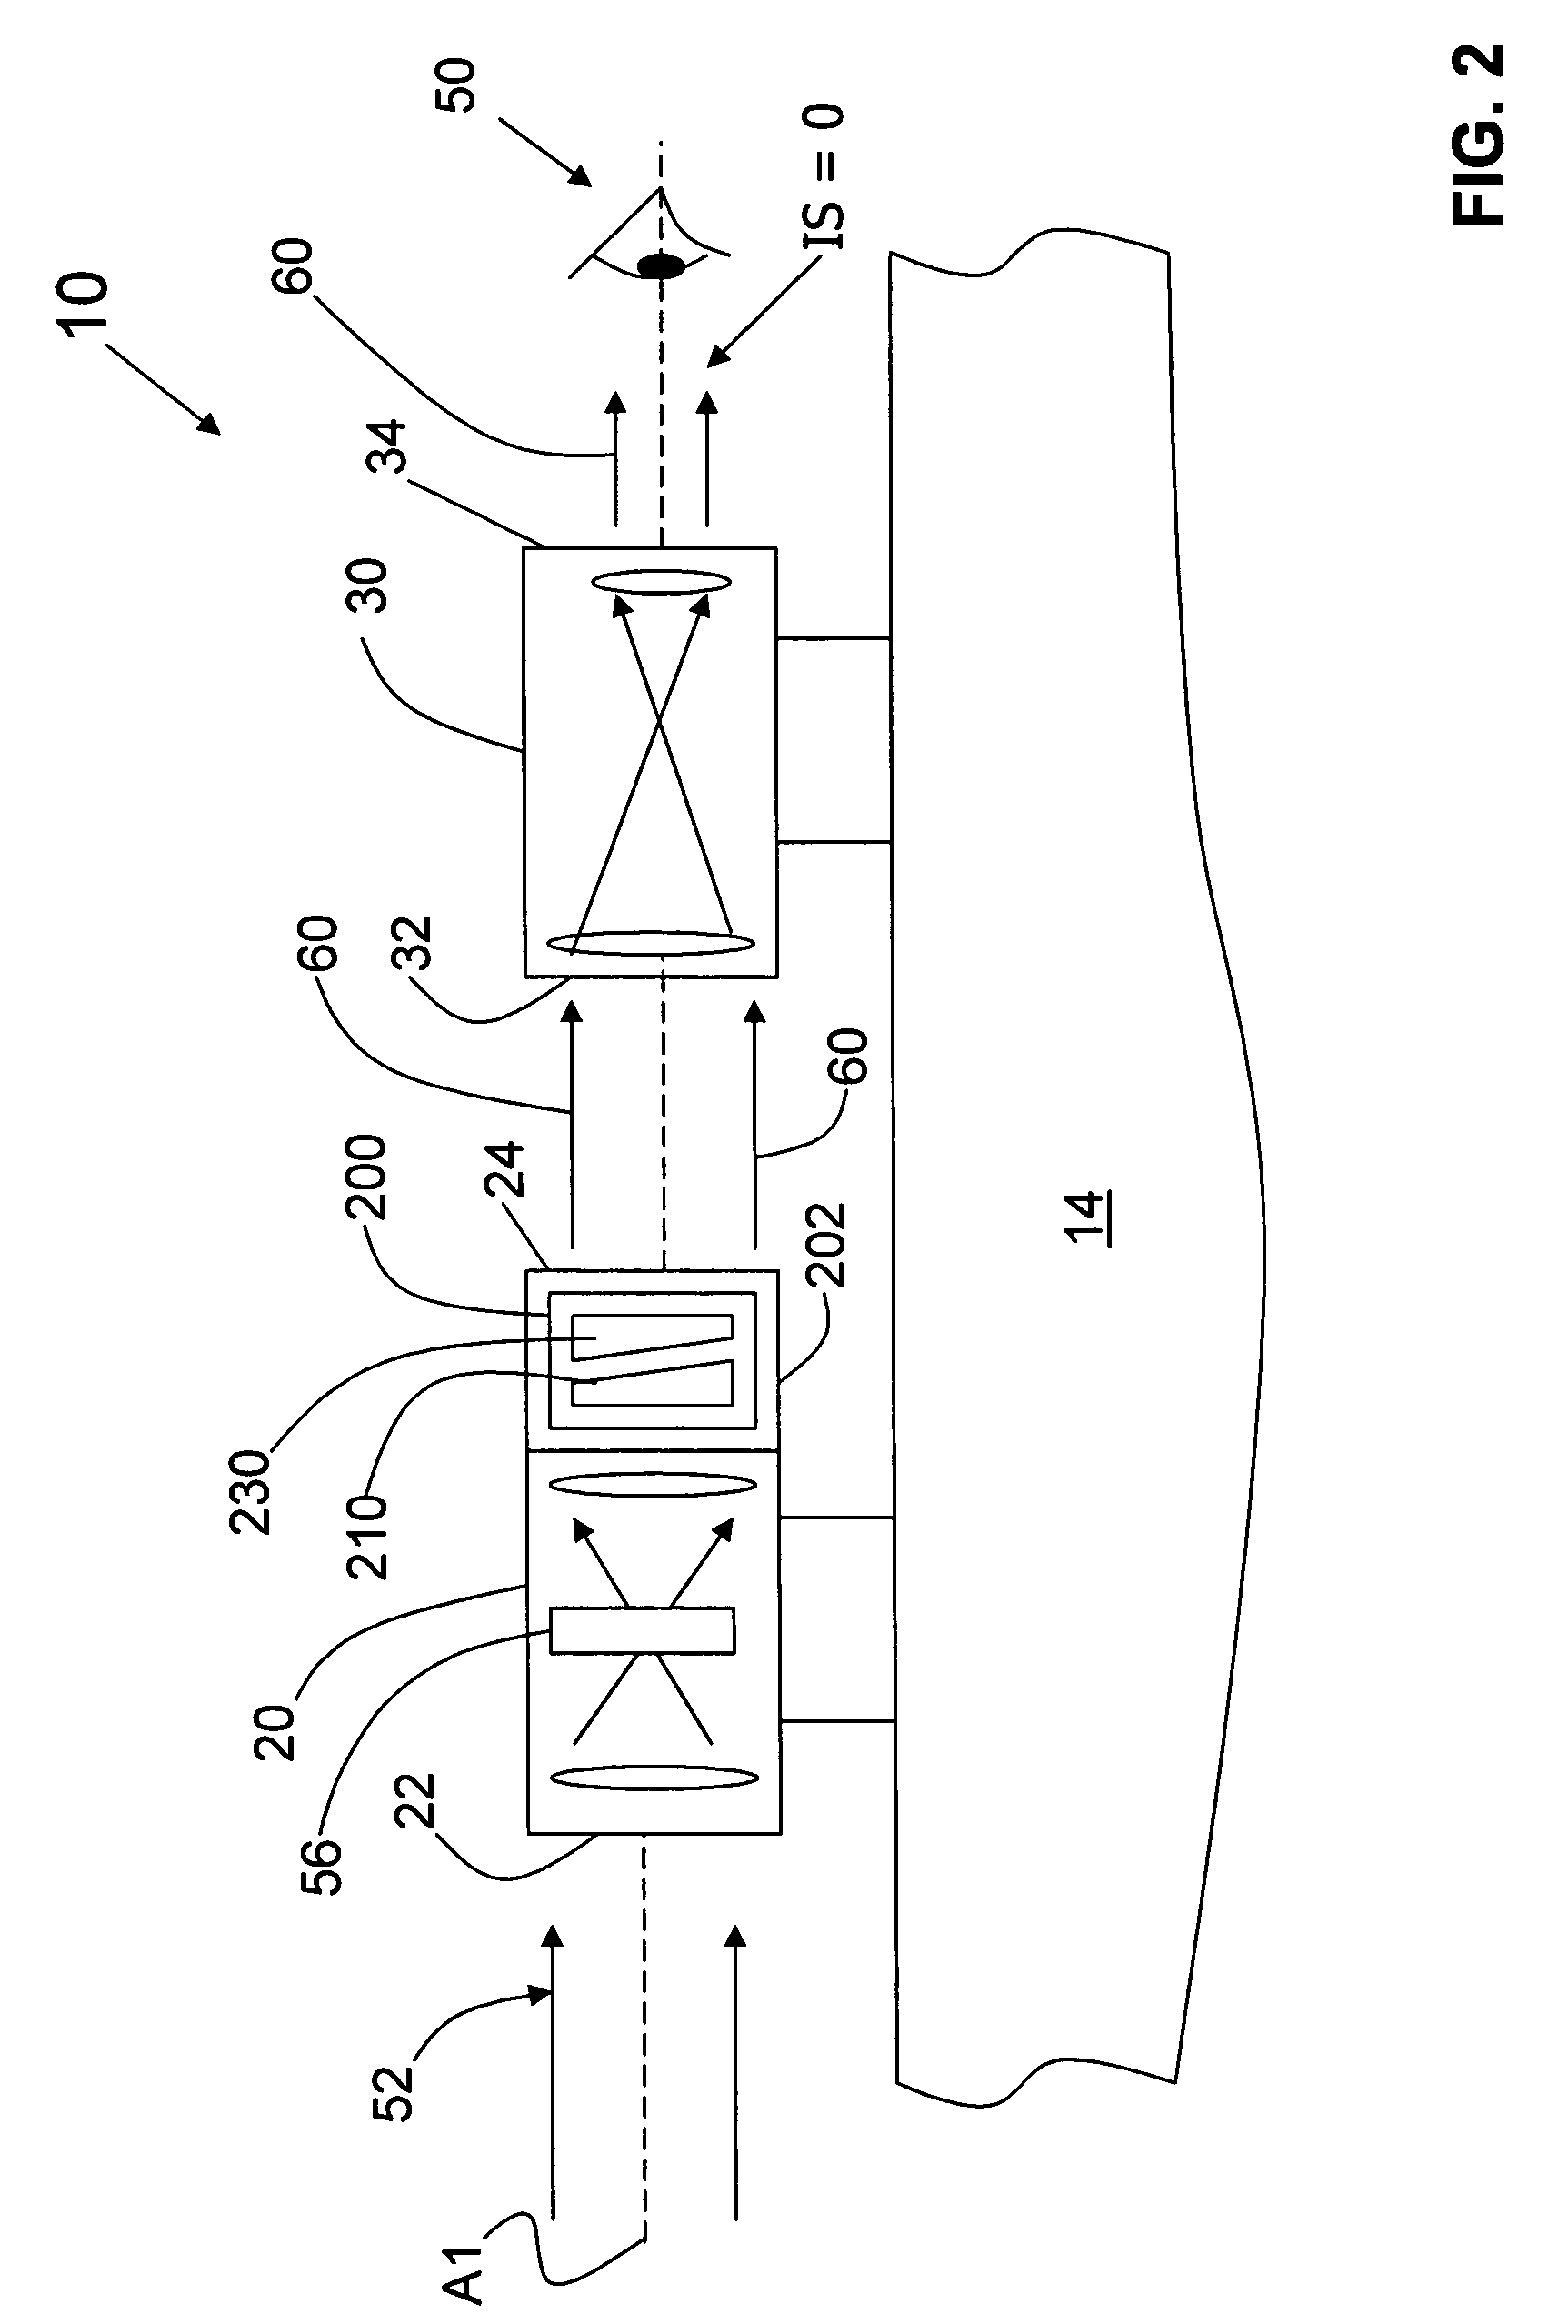 Night-day boresight with adjustable wedge-prism assembly